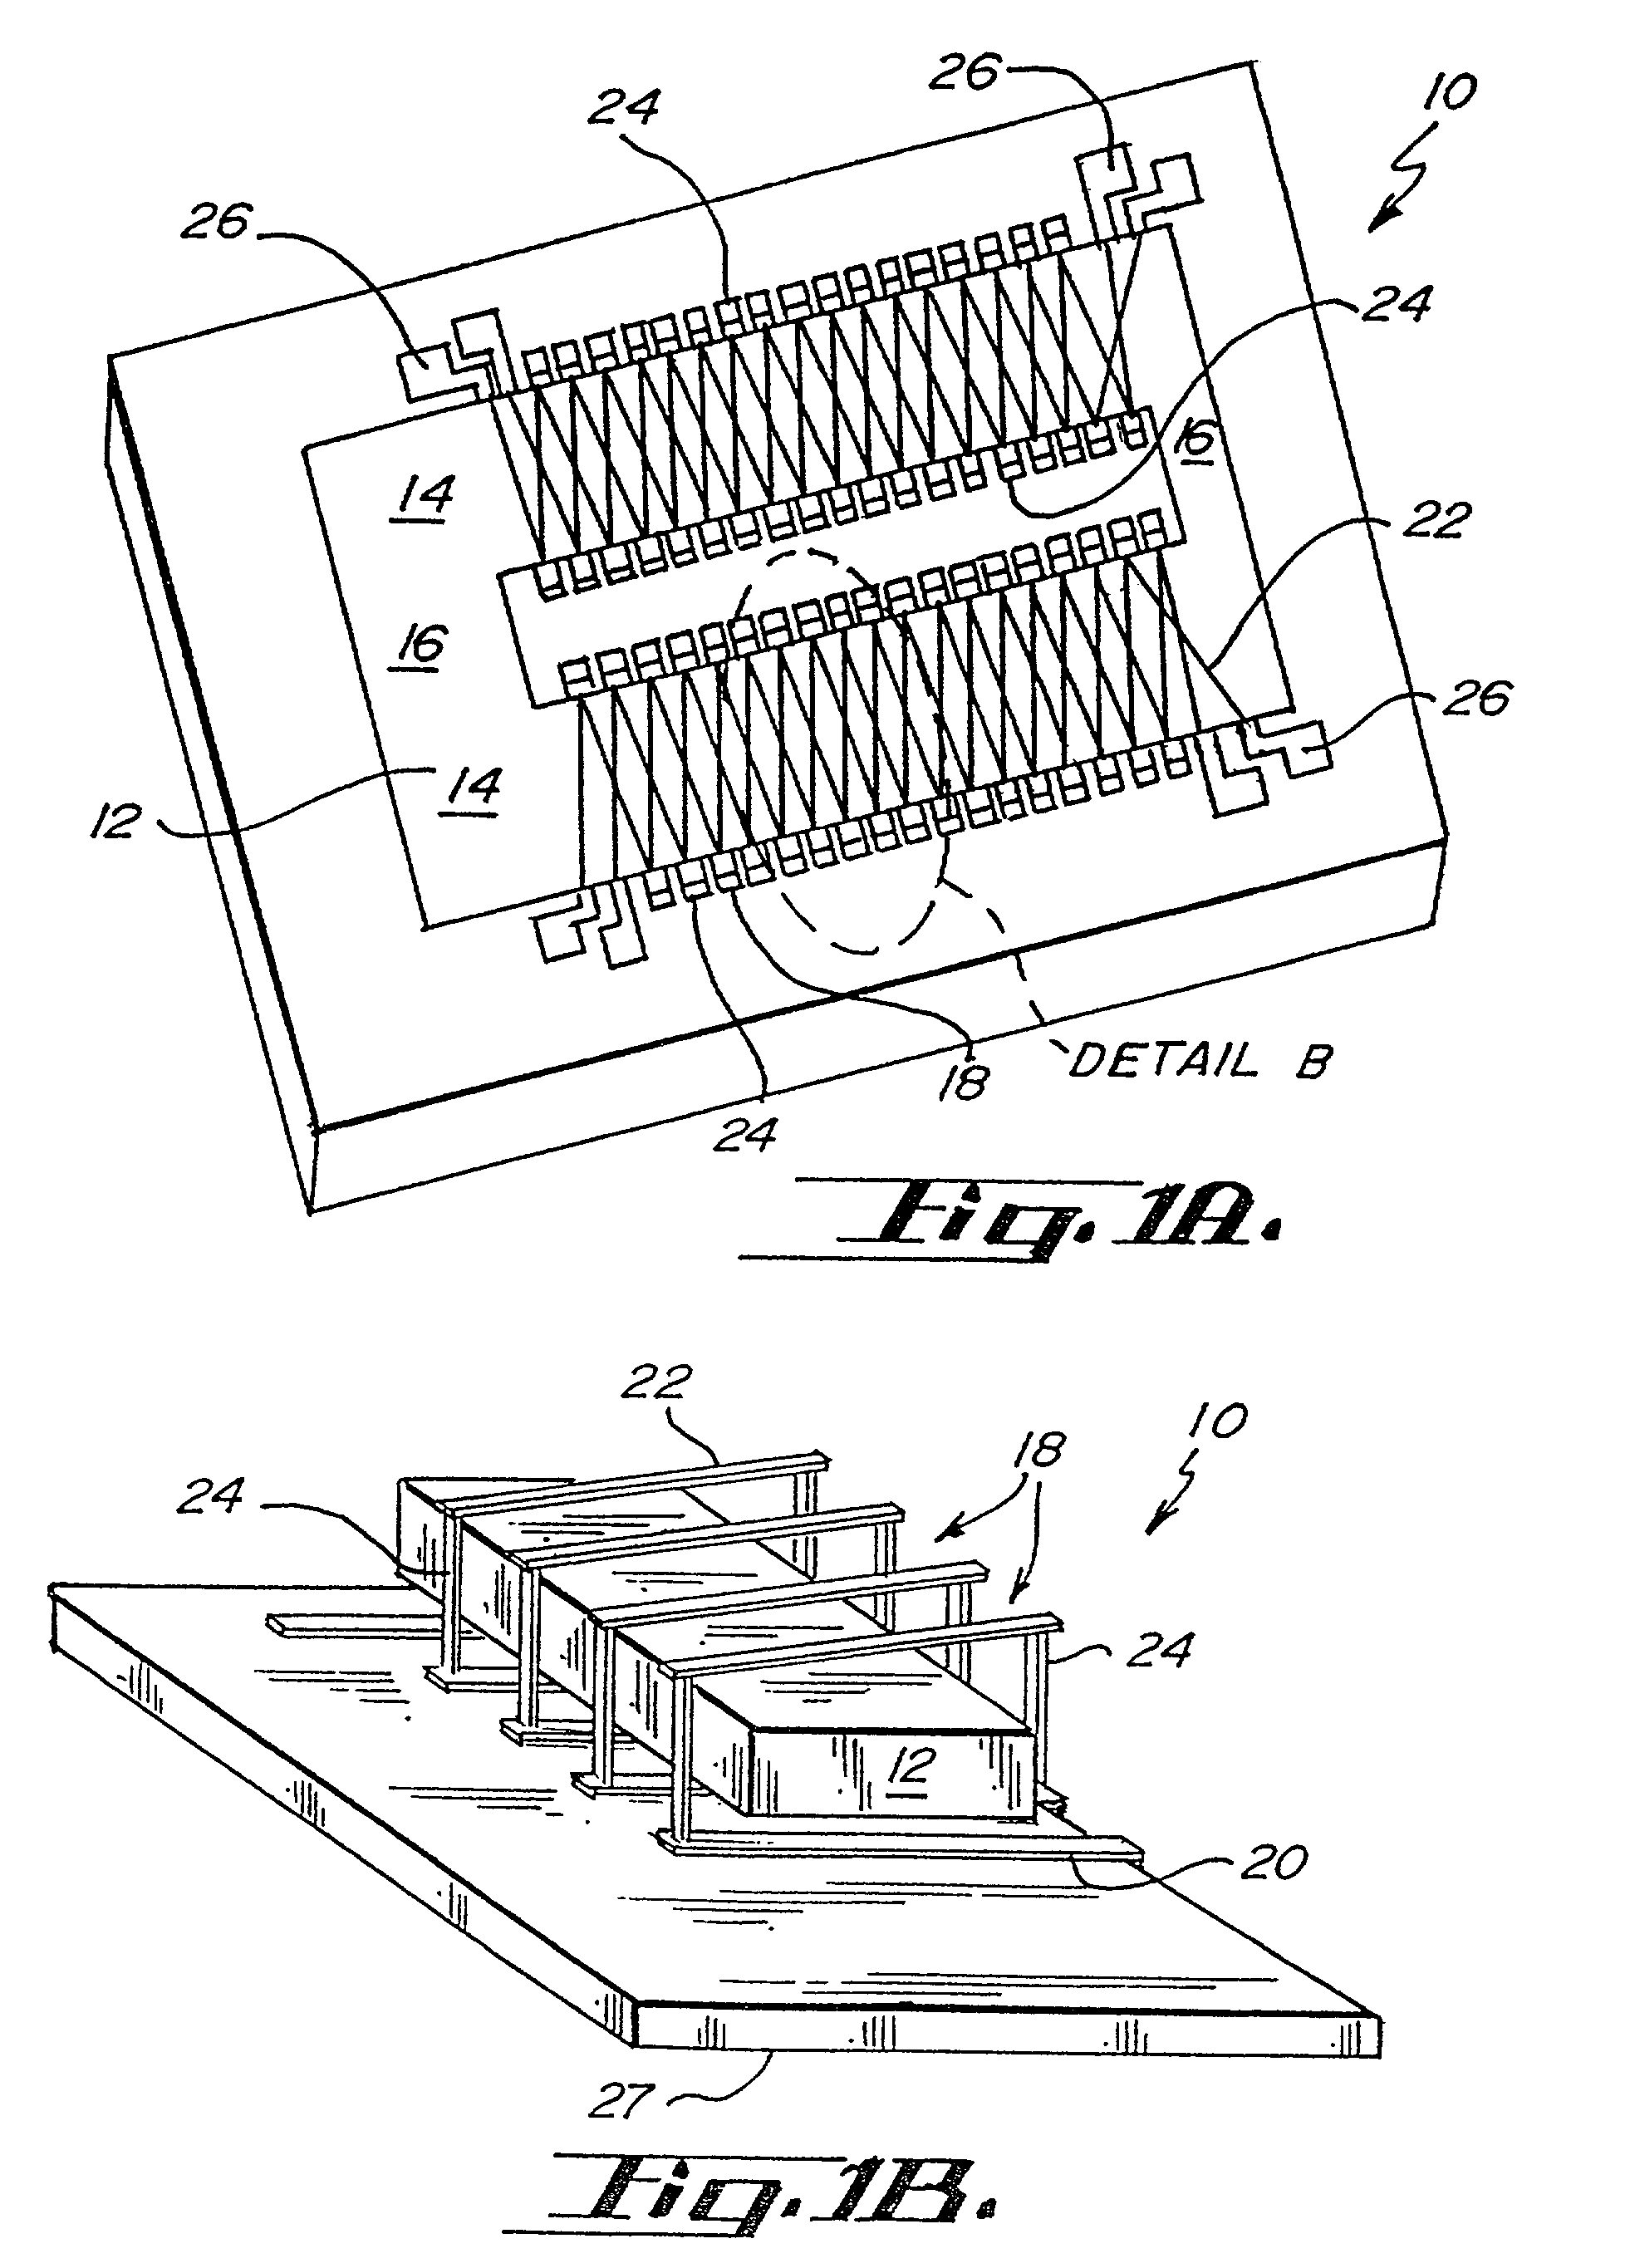 Method of manufacturing an ultra-miniature magnetic device